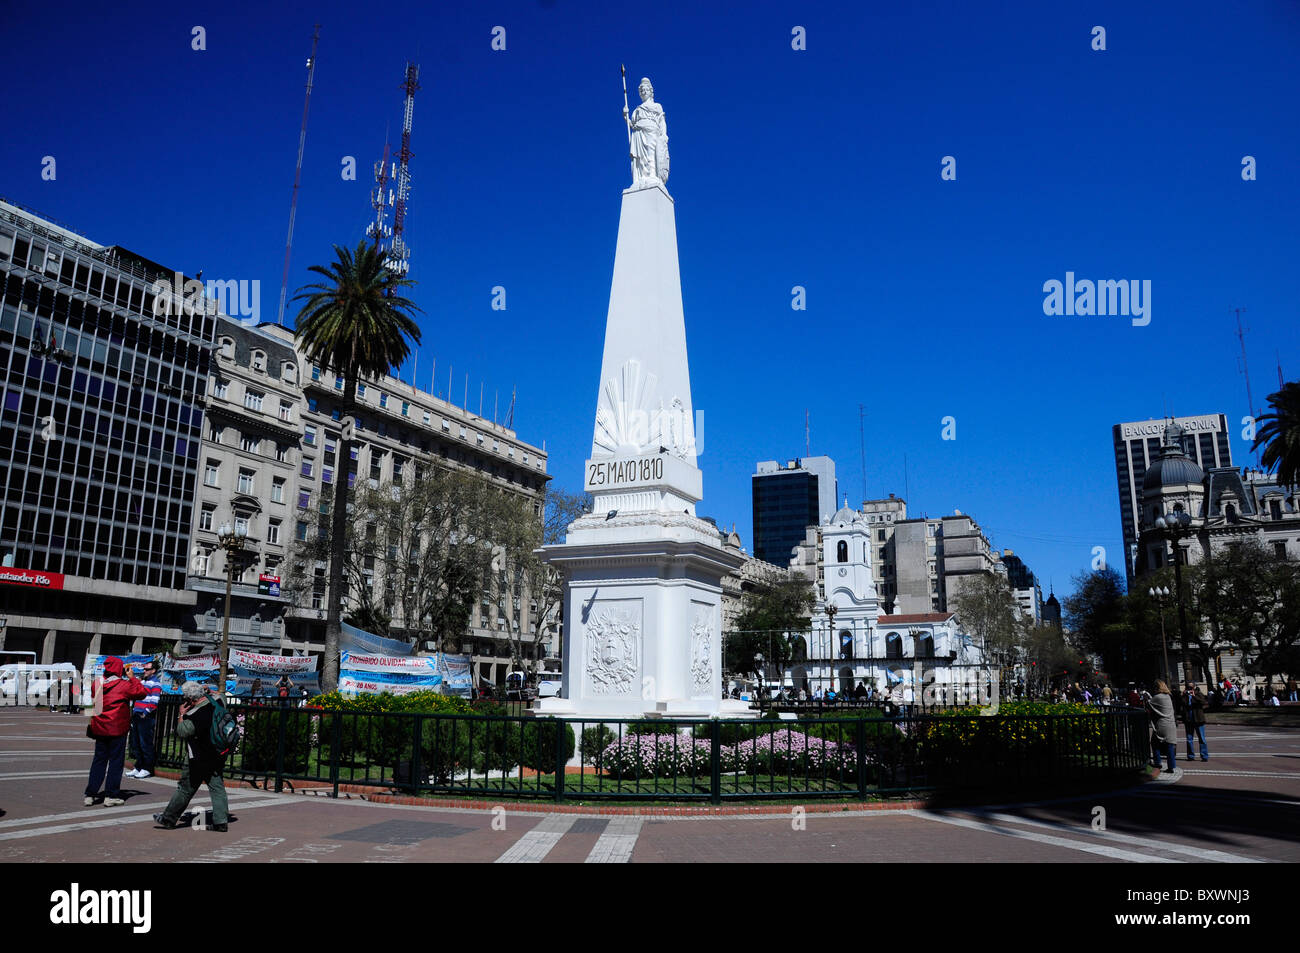 Pirámide de Mayo (May Pyramid) in the center of Plaza de Mayo (May Square), Buenos Aires, South America Stock Photo